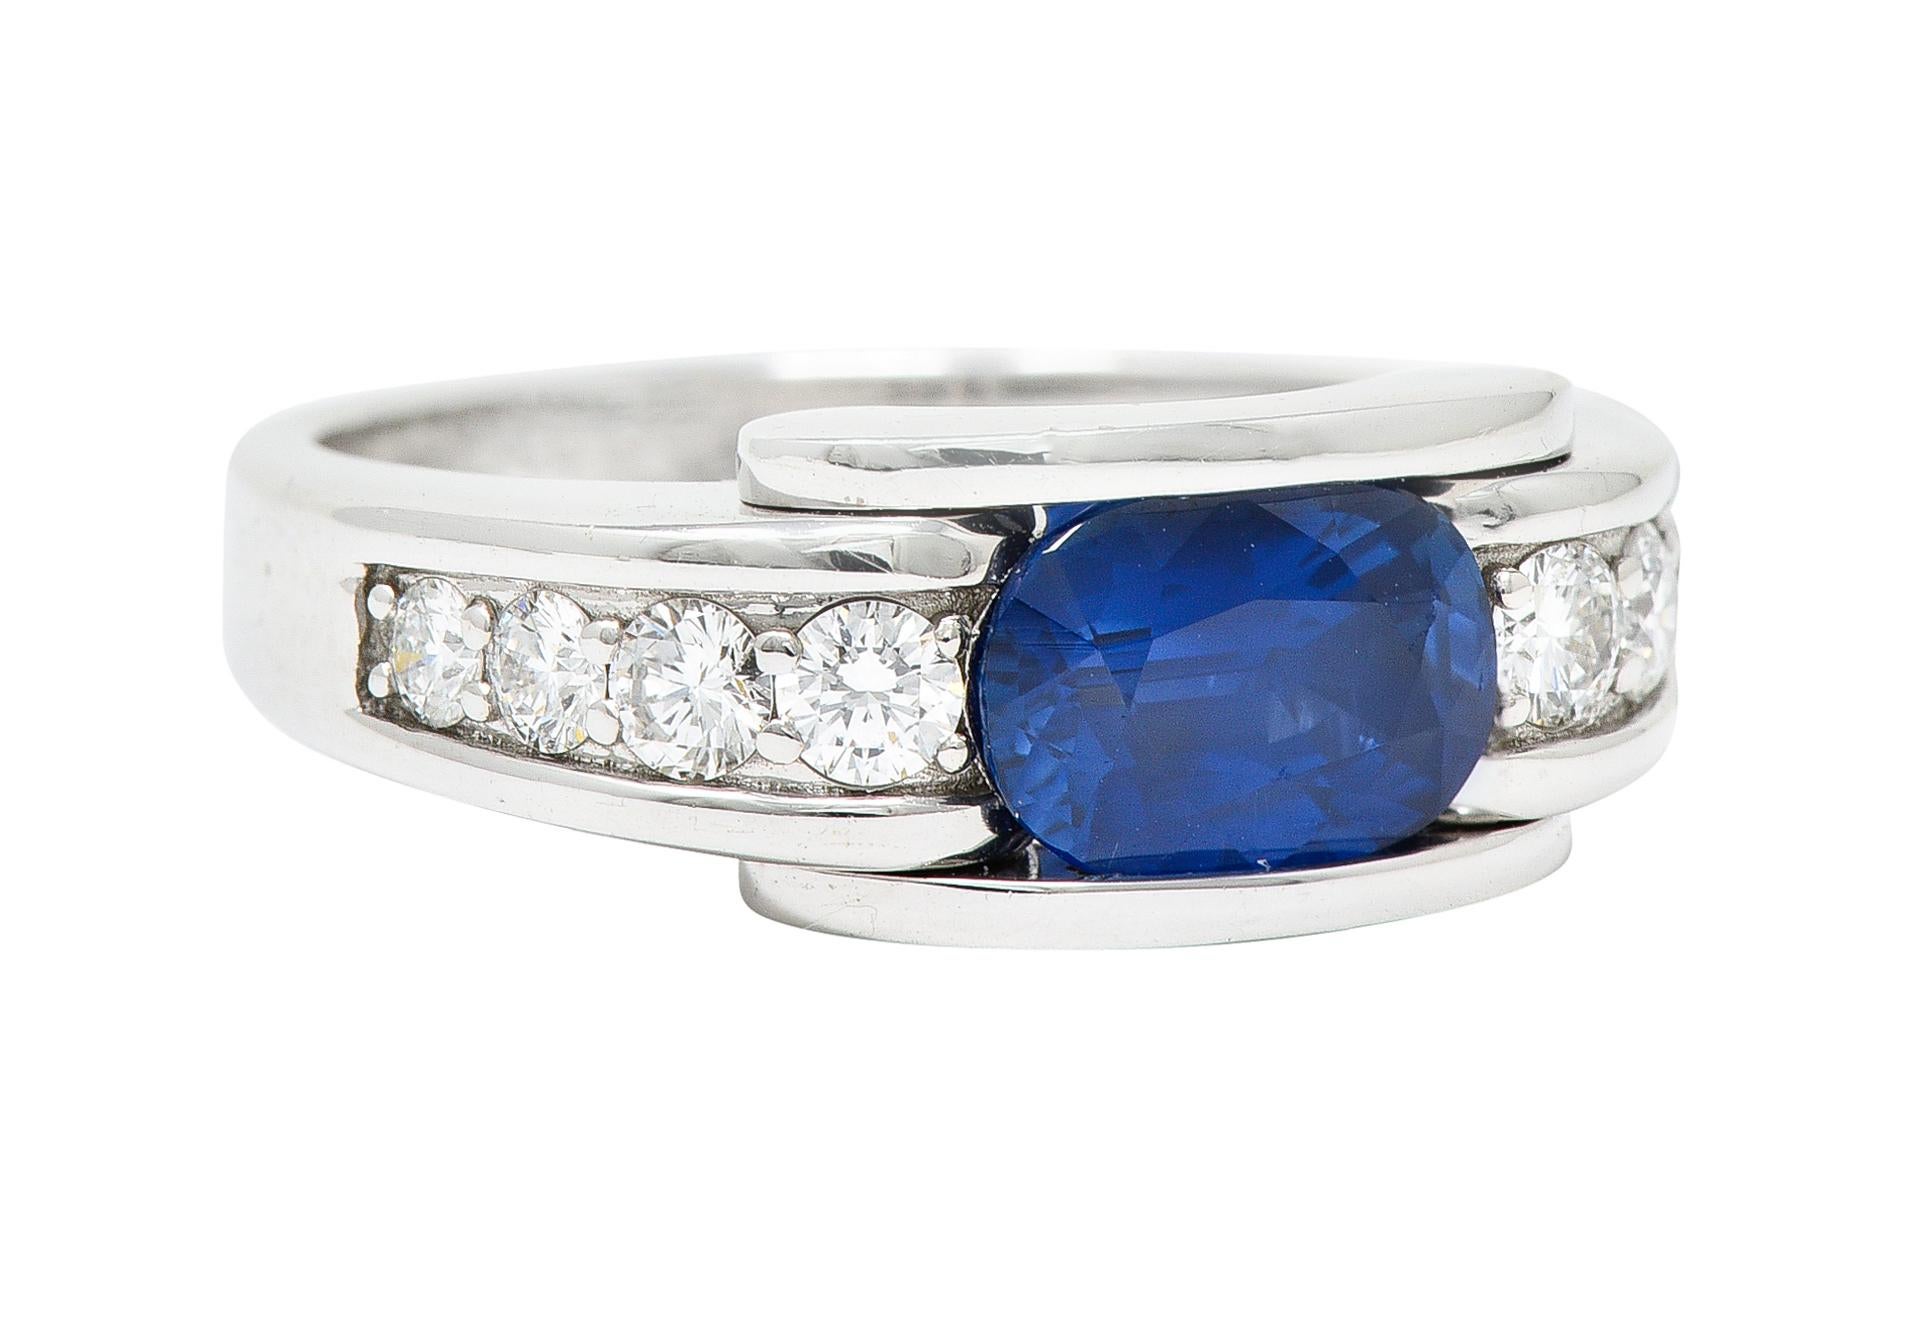 Band ring centers an oval cut sapphire weighing approximately 1.30 carats

Channel set East to West with saturated slightly violetish and strongly blue color

Flanked by round brilliant cut diamonds - bead set in a recessed channel

Weighing in